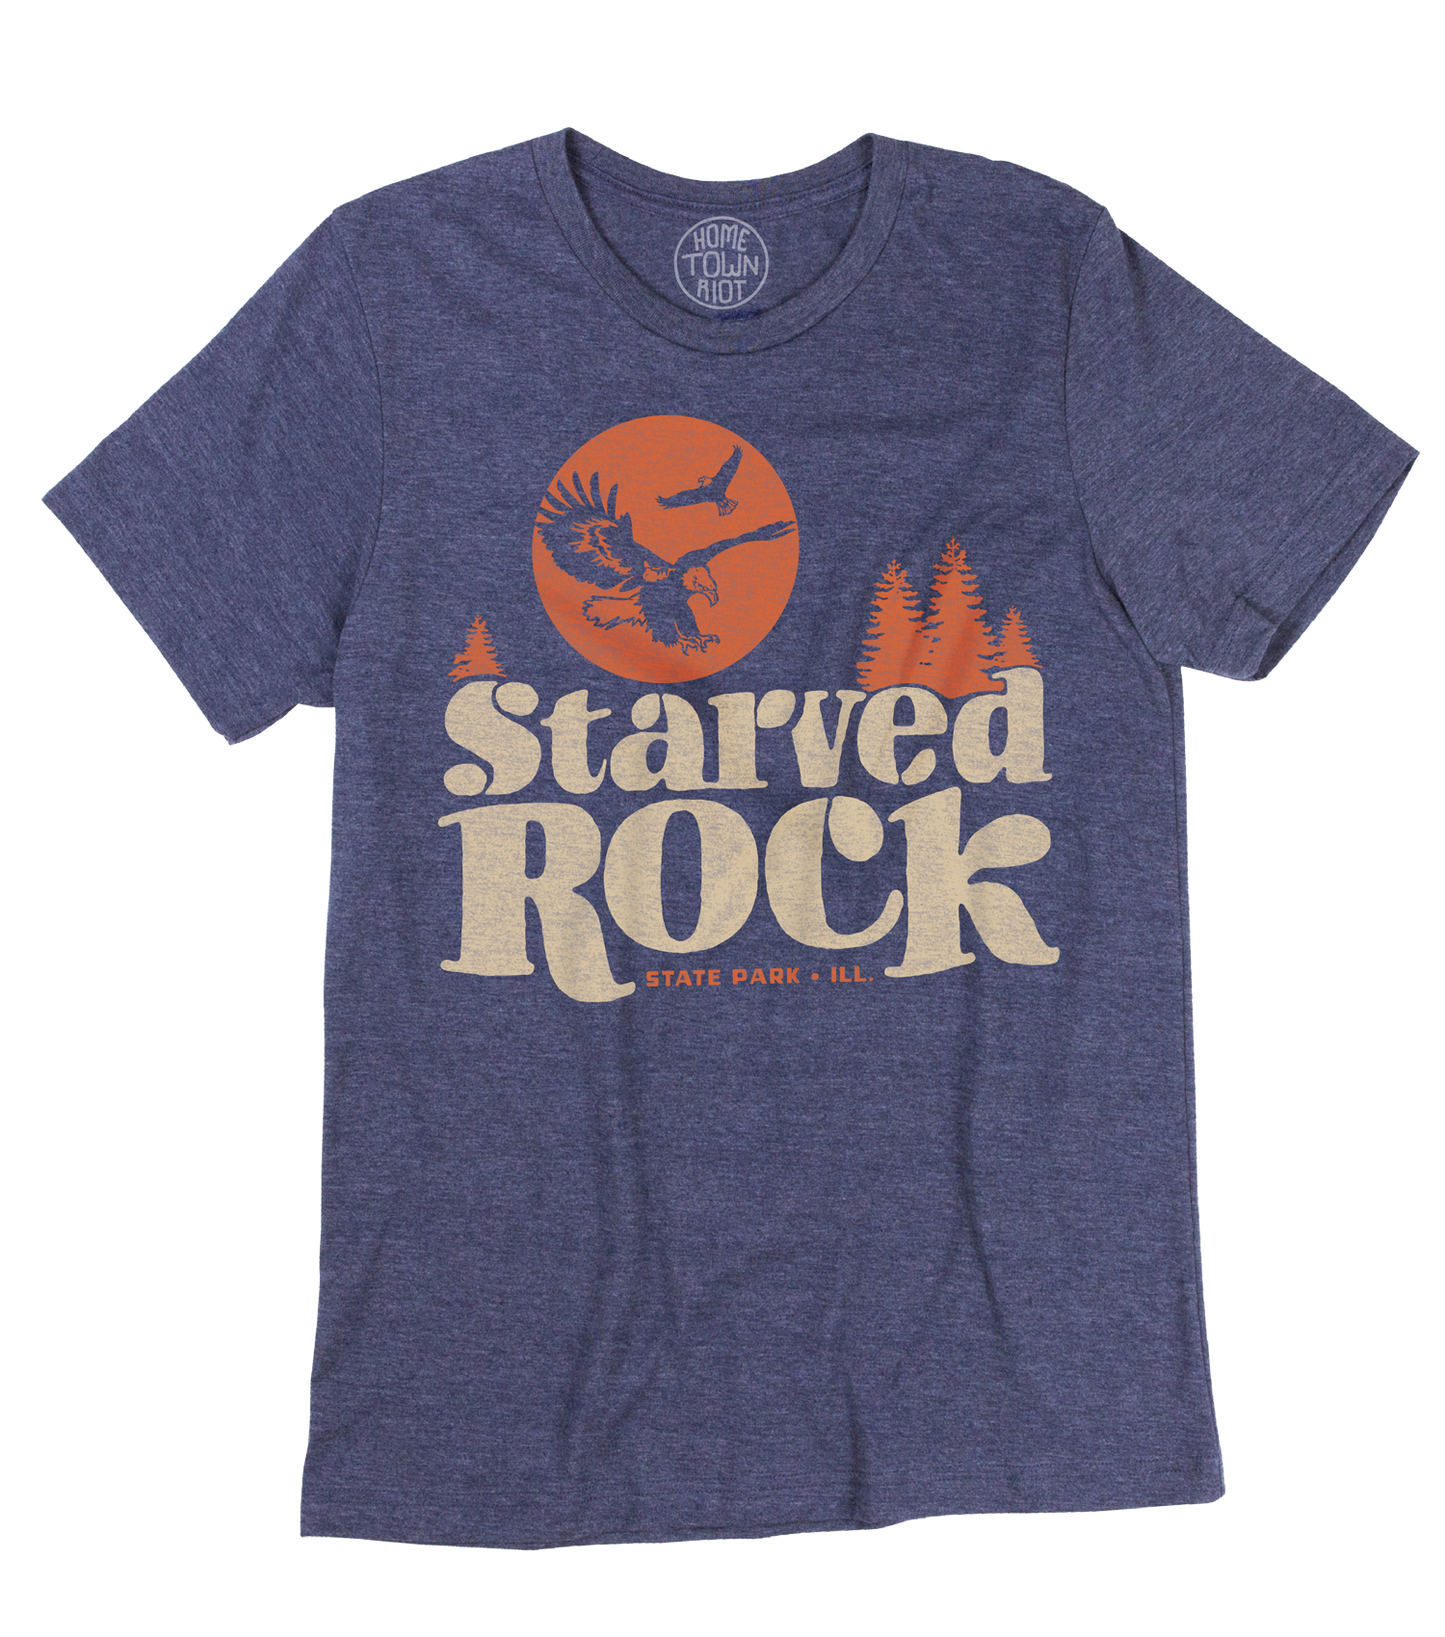 Starved Rock State Park Shirt